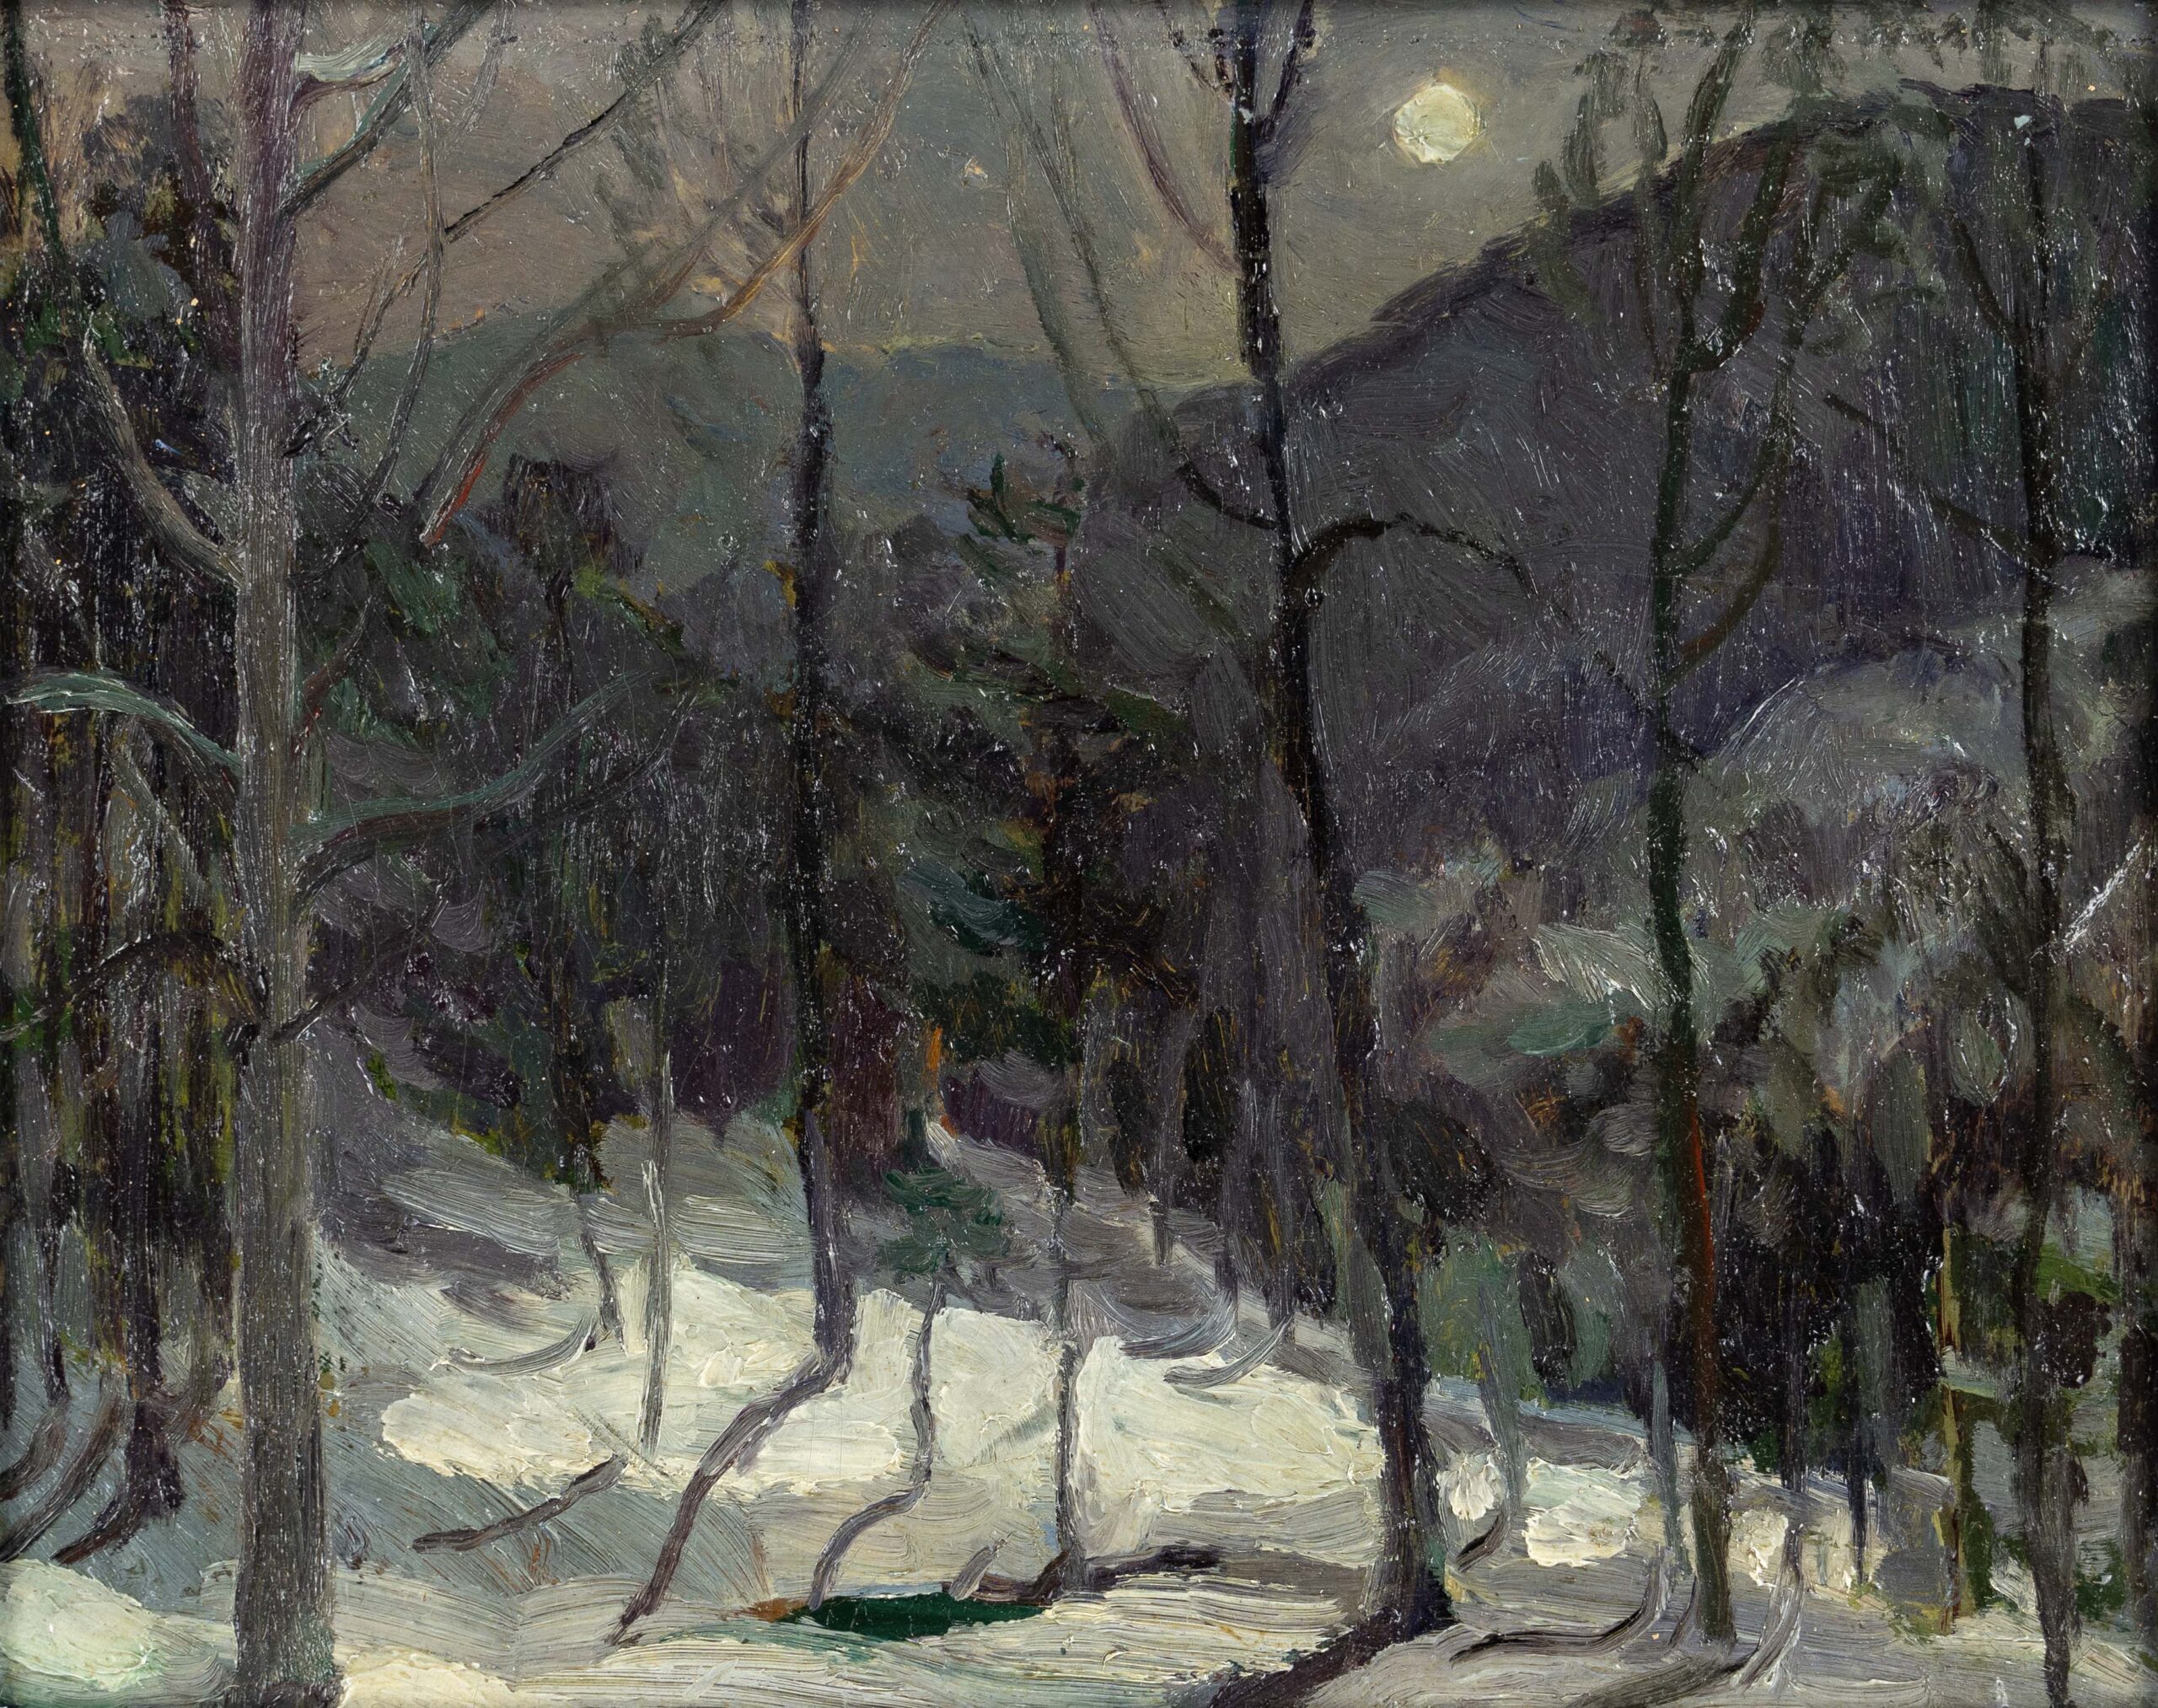 Elizabeth White, "Moonlight Montreat," not dated, oil on panel, 8 × 10 inches. Courtesy of Allen & Barry Huffman, Asheville Art Museum